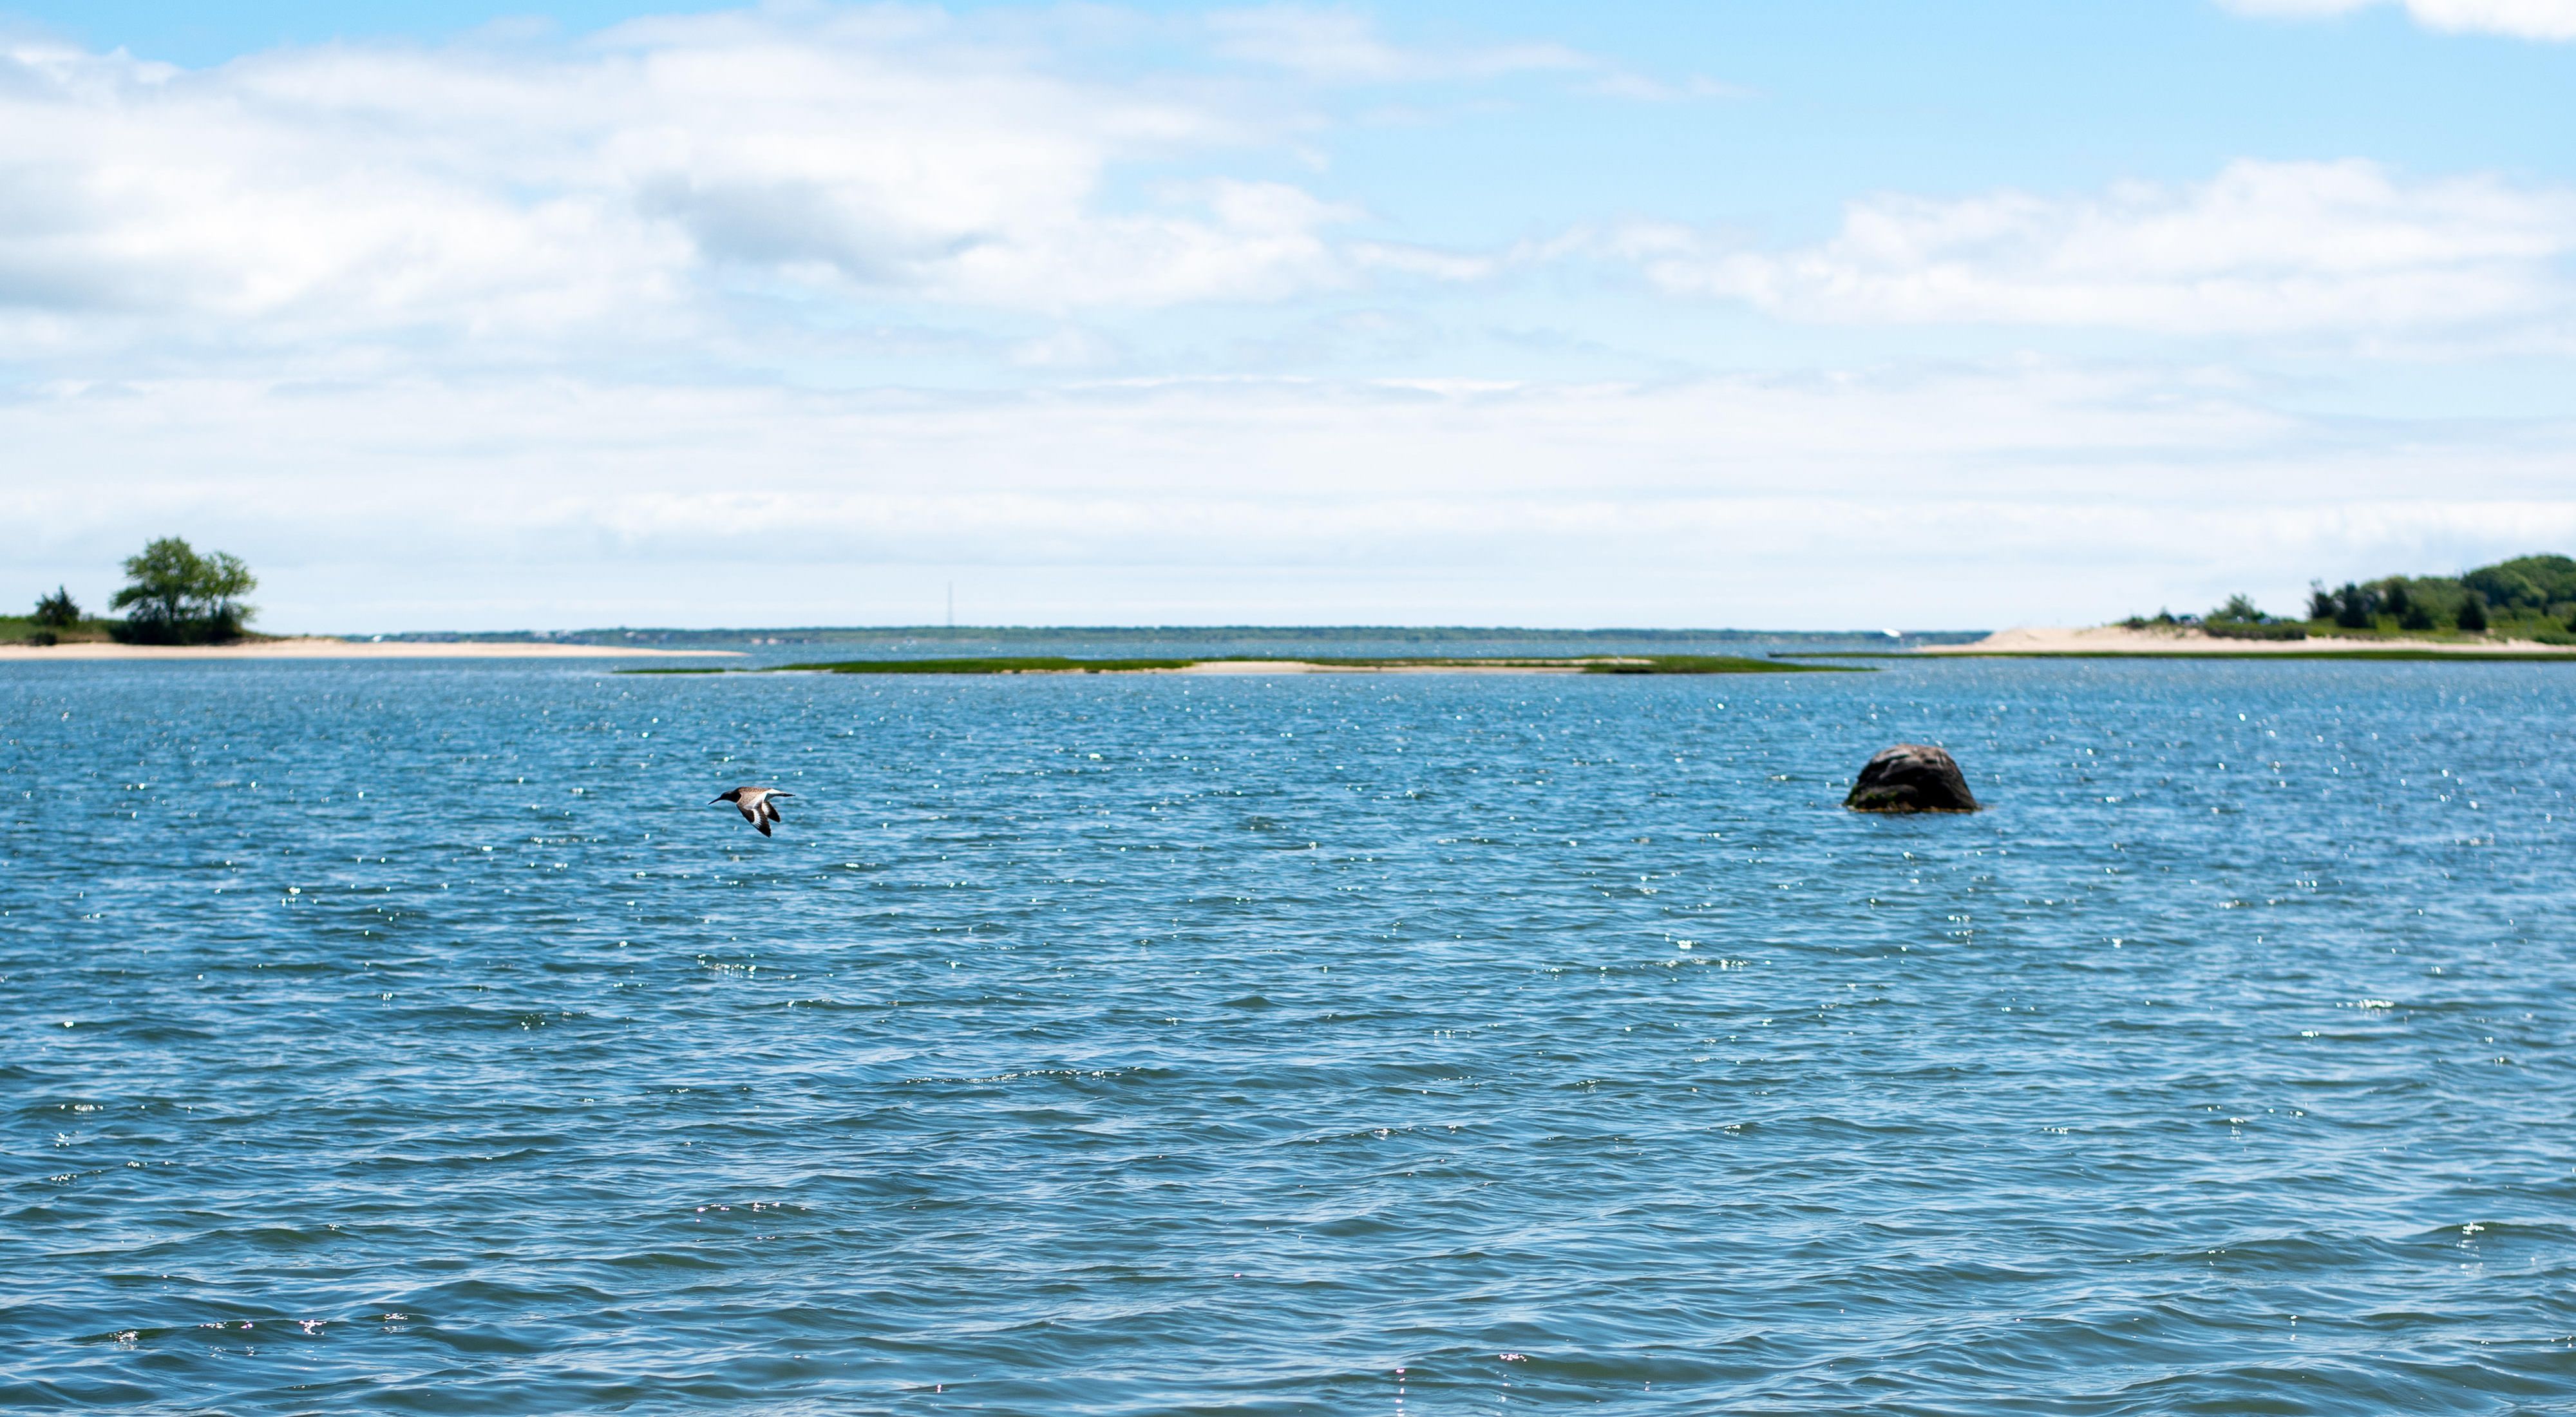 A bird on the left side of the screen flying over a body of water with shoreline in the background.